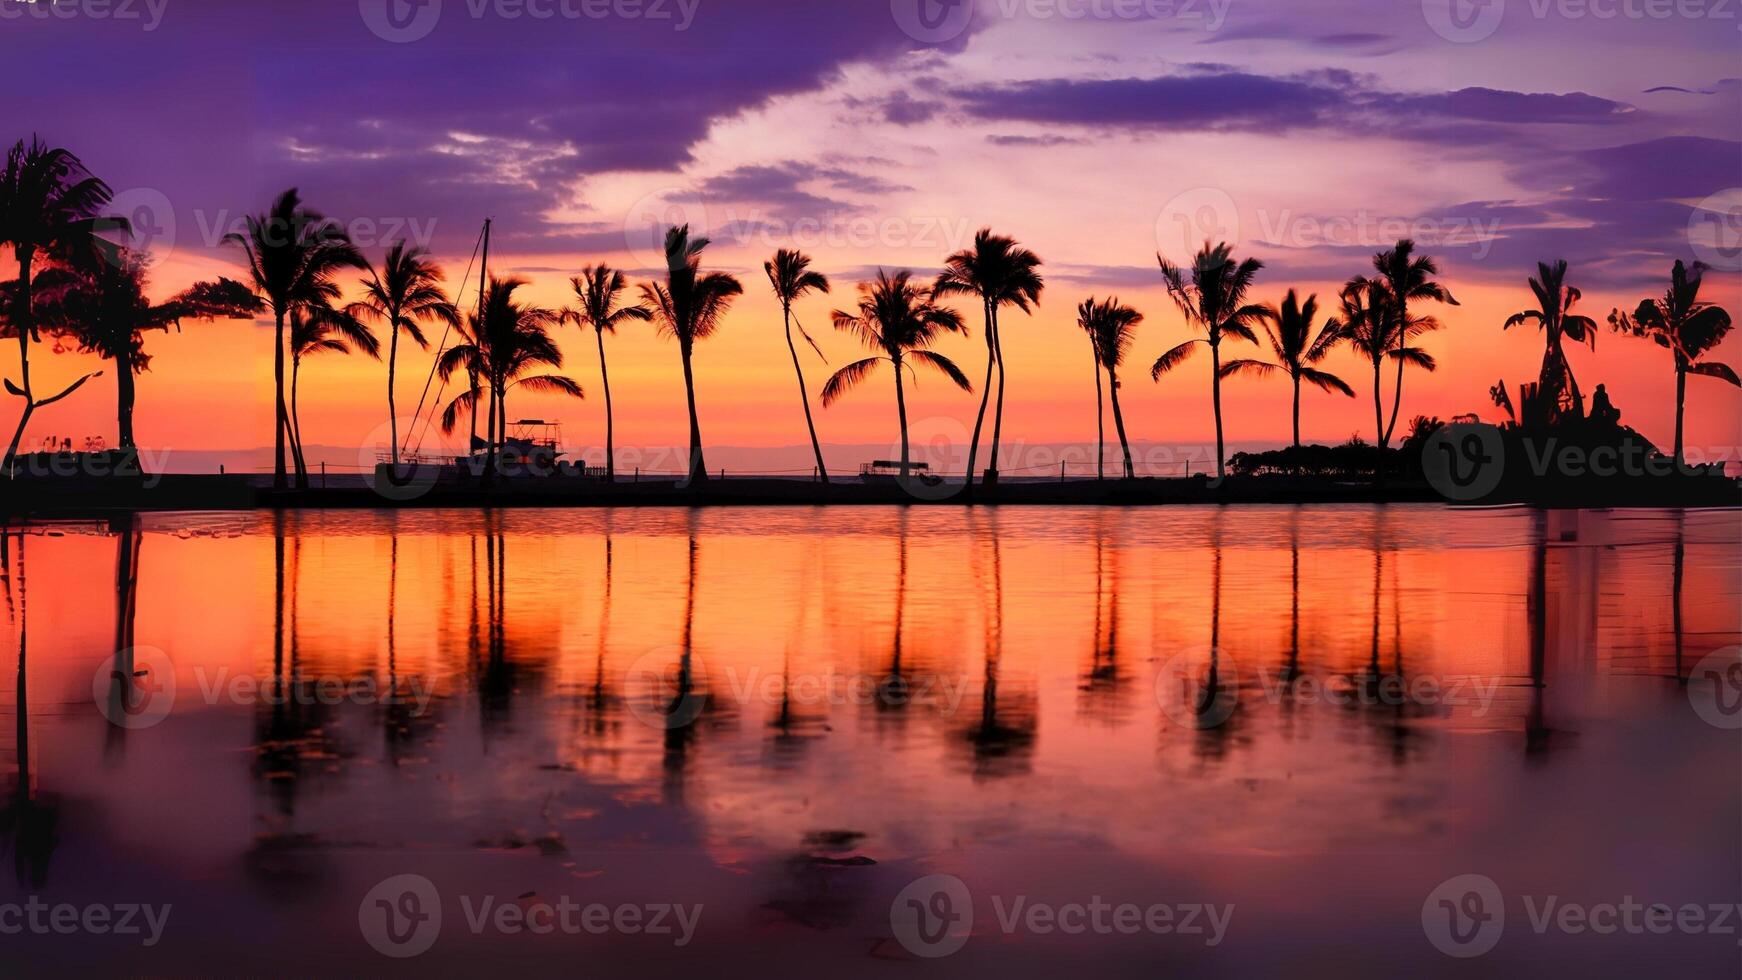 Transport yourself to a tropical paradise with this enchanting Vecteezy image of coconut trees swaying in the breeze photo